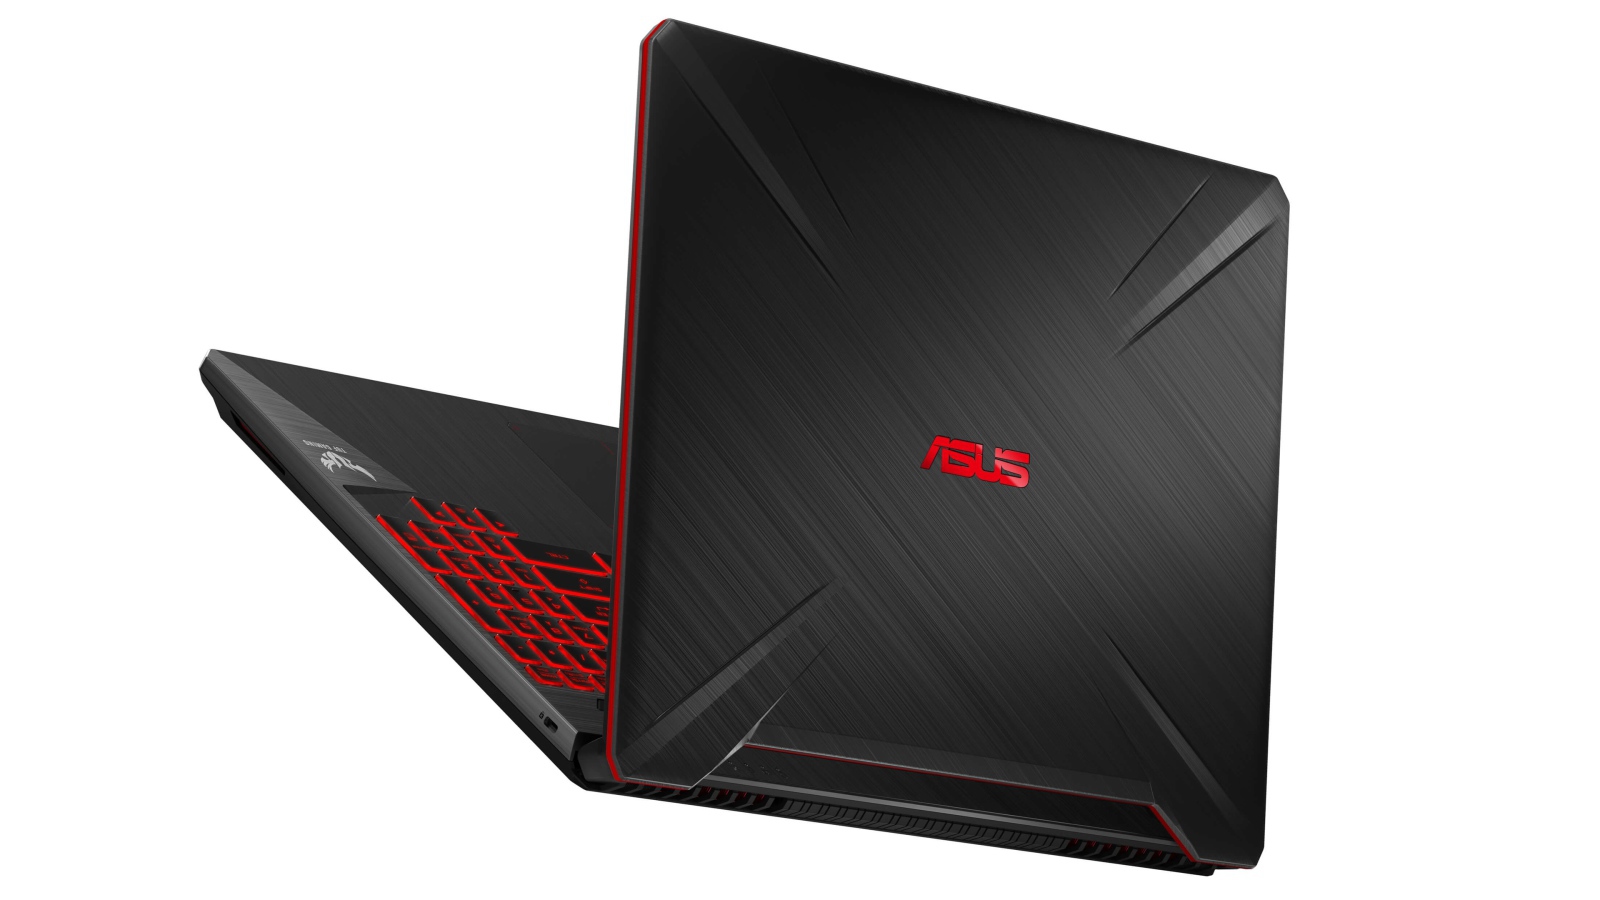 New gaming laptop ASUS TUF Gaming FX505DY & FX705DY on a gray background